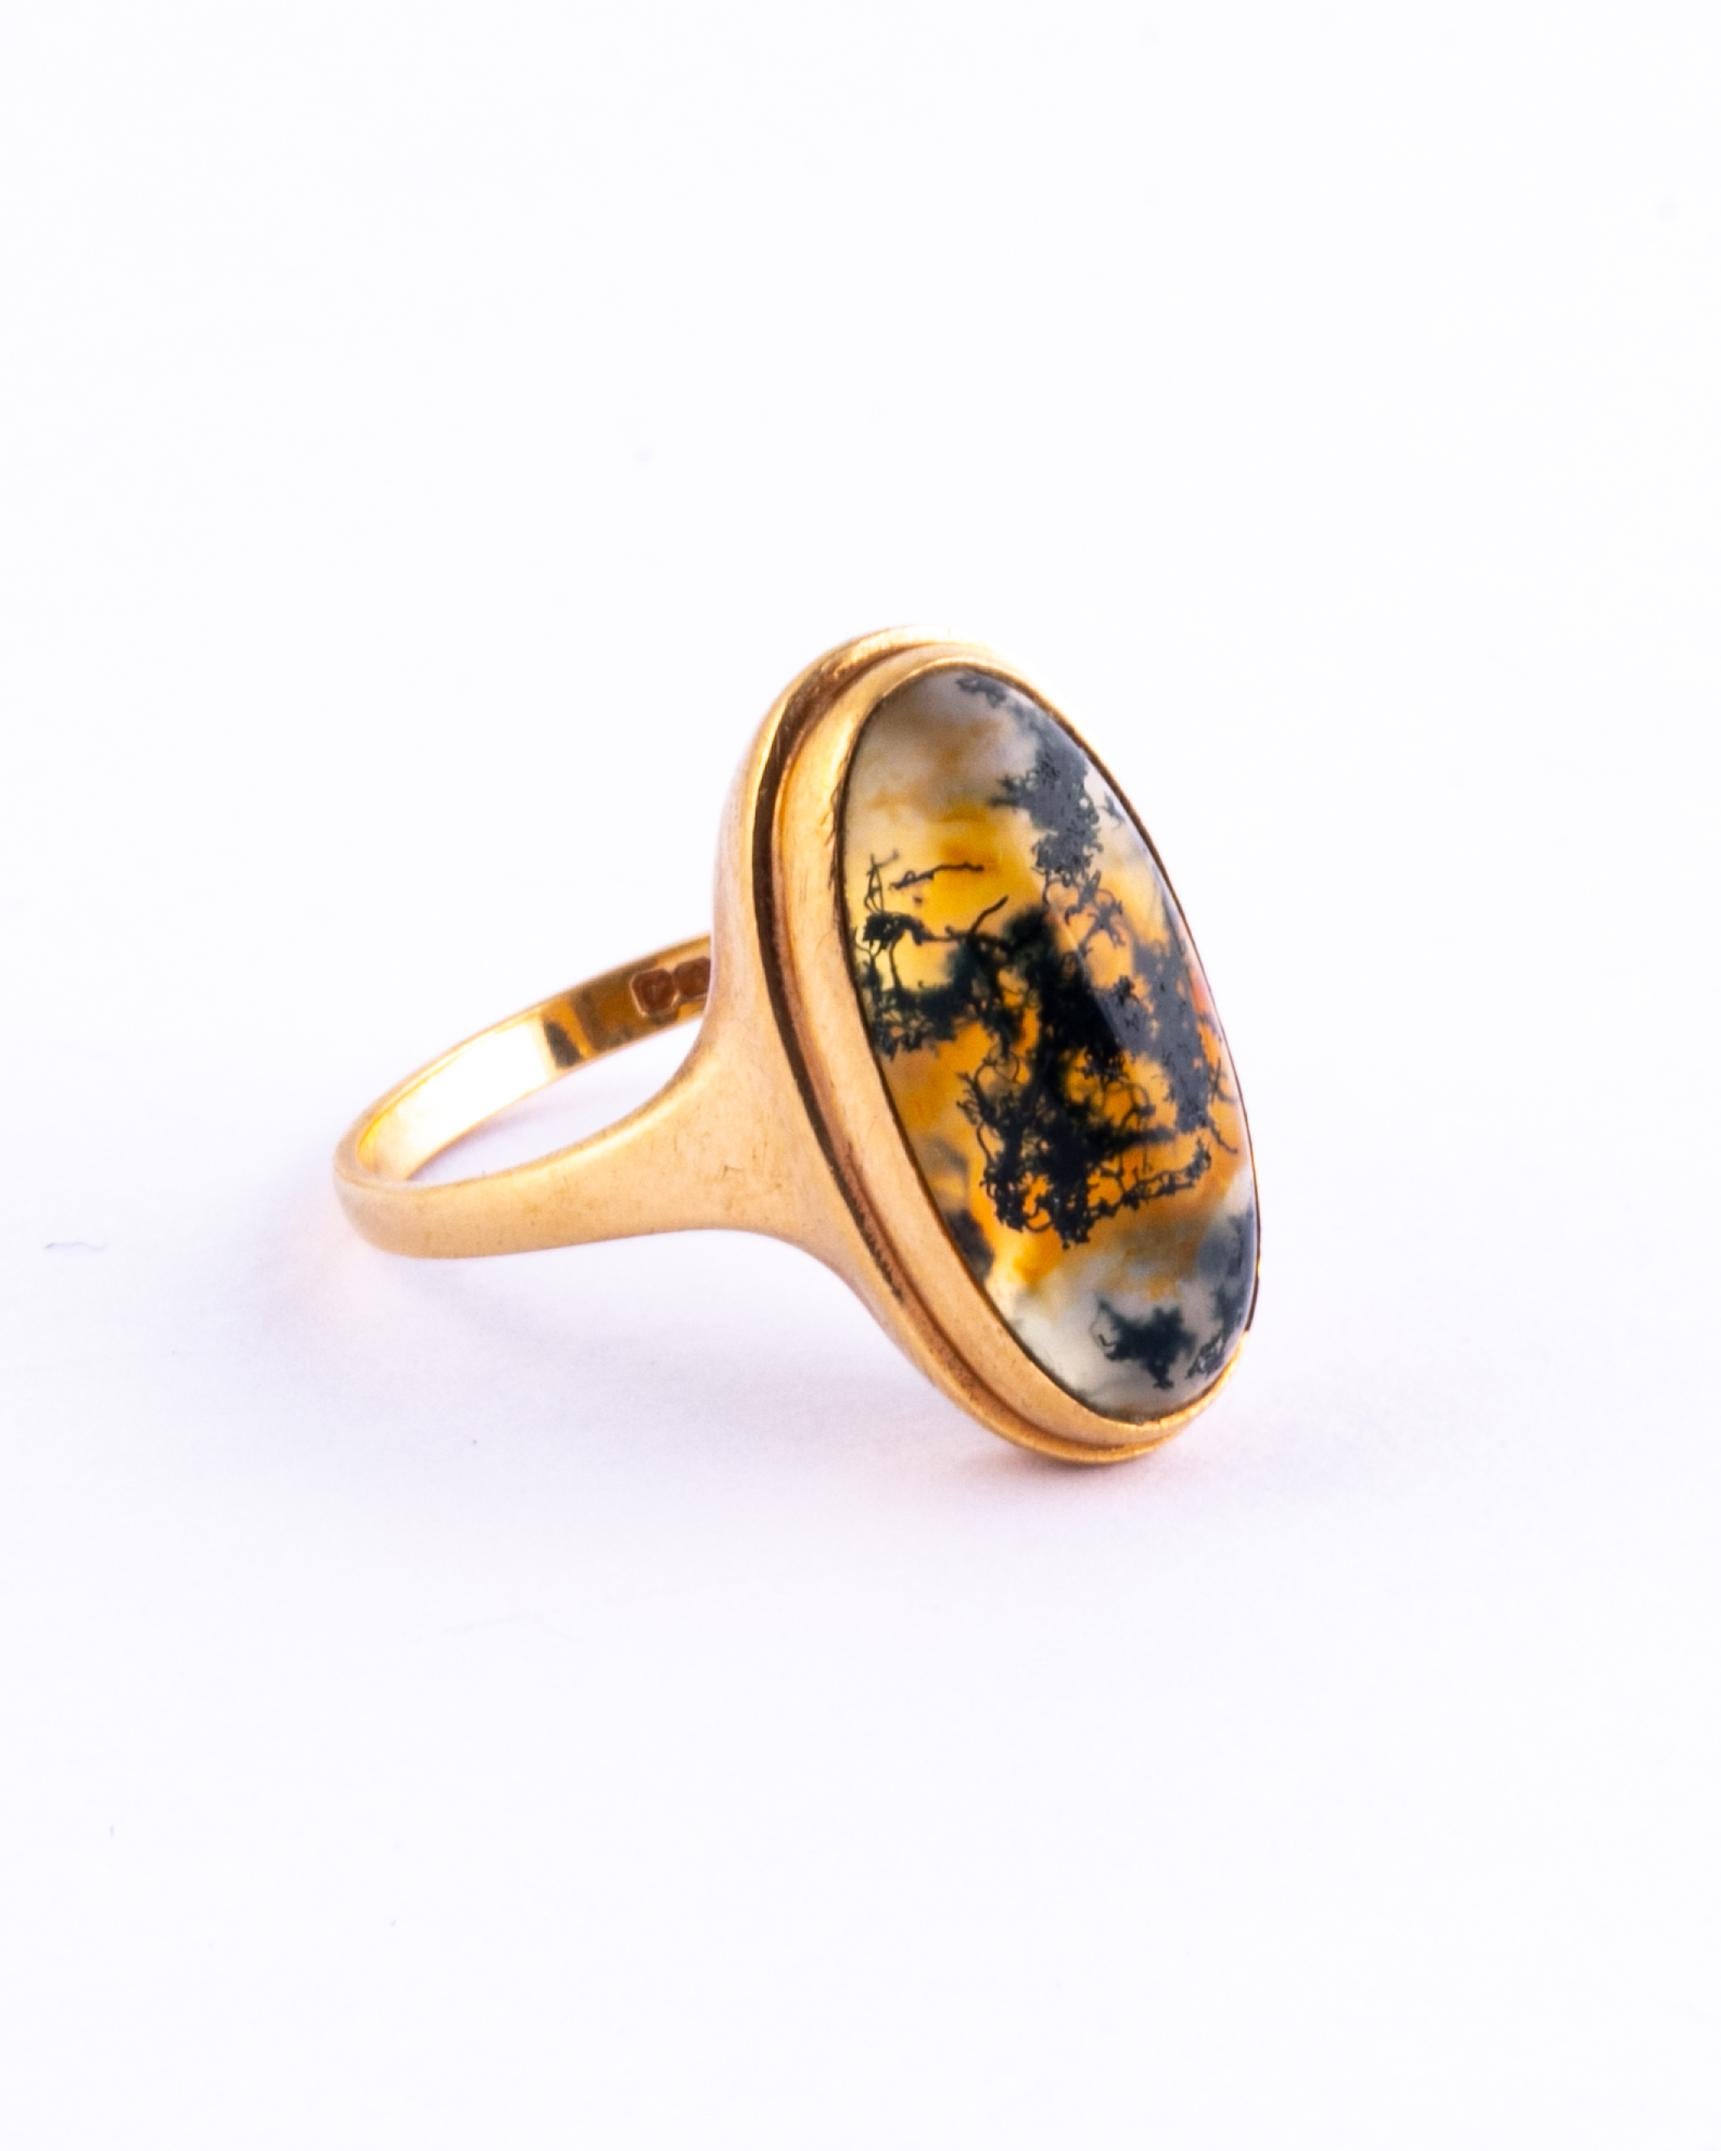 This wonderful moss agate stone has marbling of deep green and amber colour running through. Surrounding the stone there is a simple frame and simple setting. 

Ring Size: O or 7 1/4 
Stone Dimensions: 18x9mm 

Weight: 4.3g